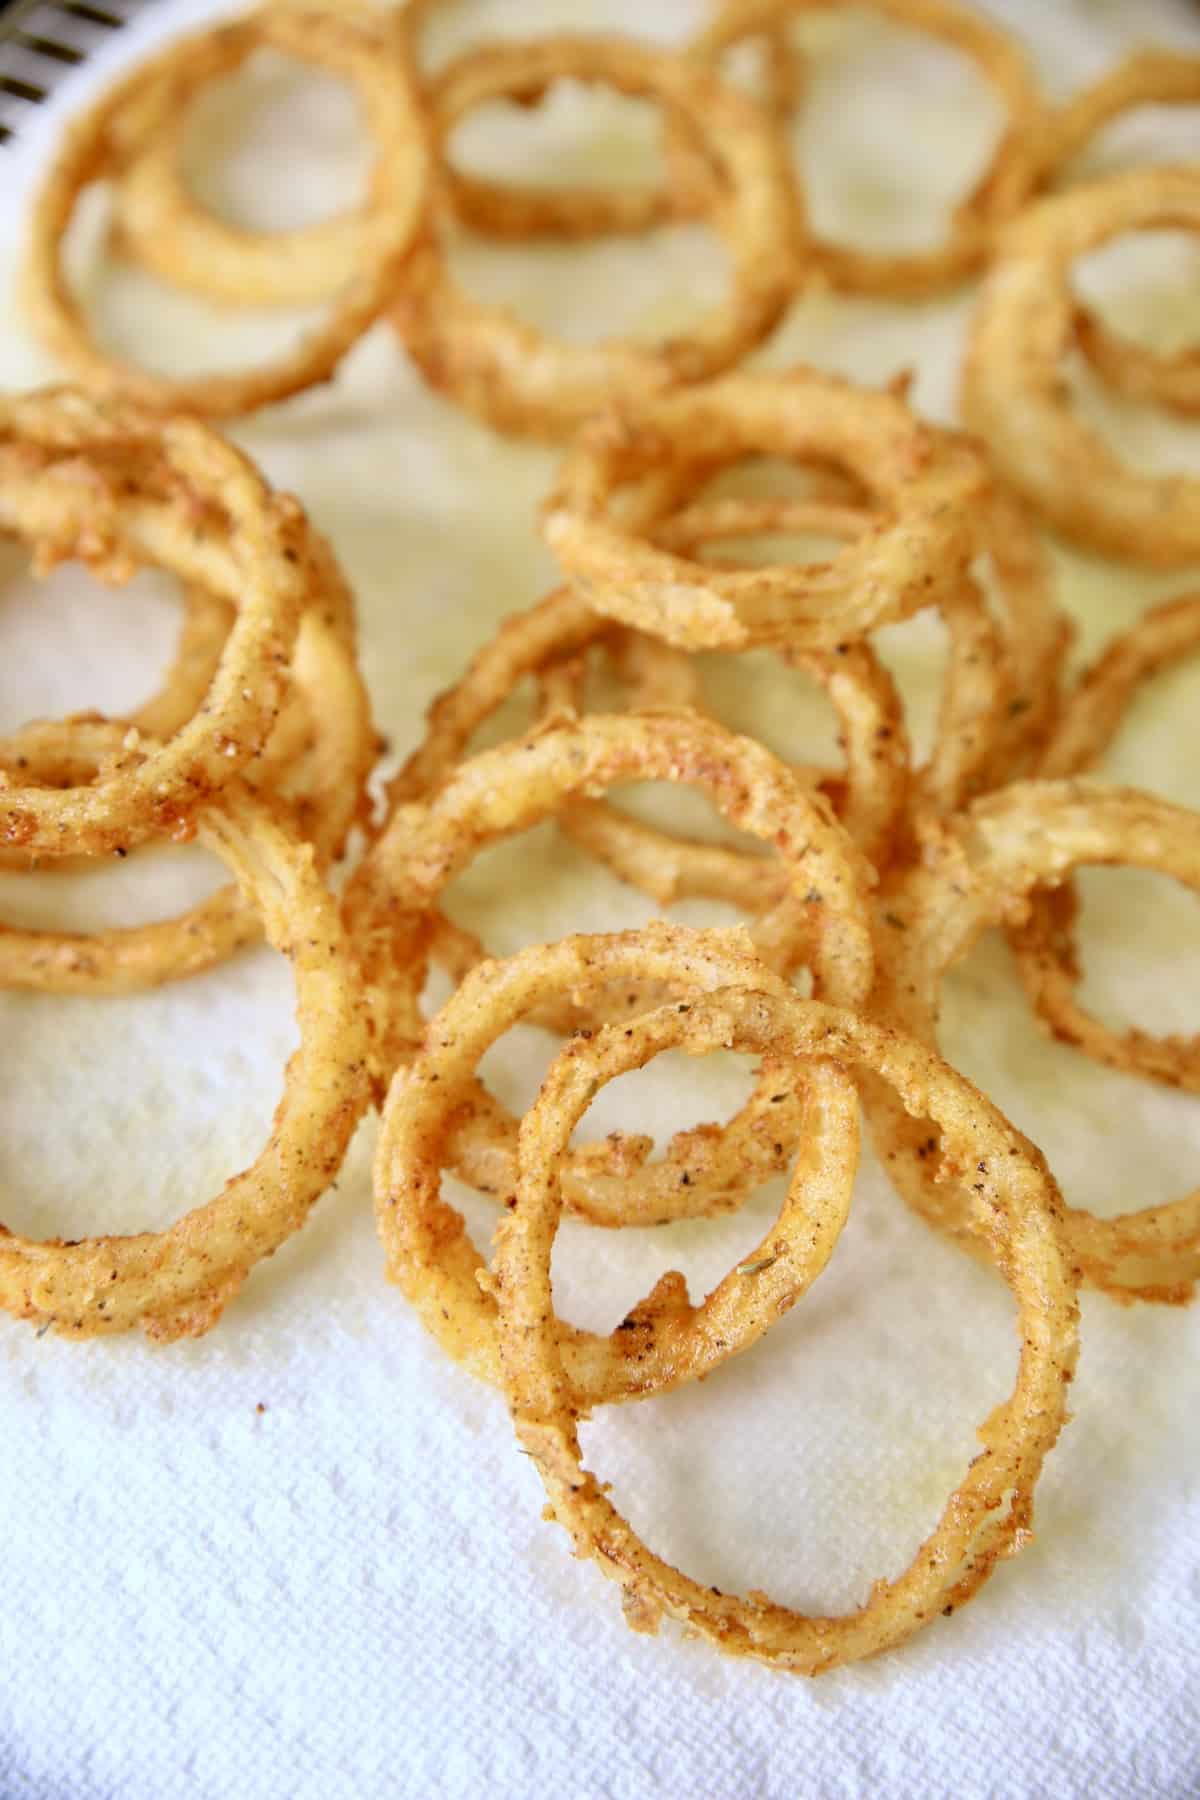 Onion rings on a paper towel.